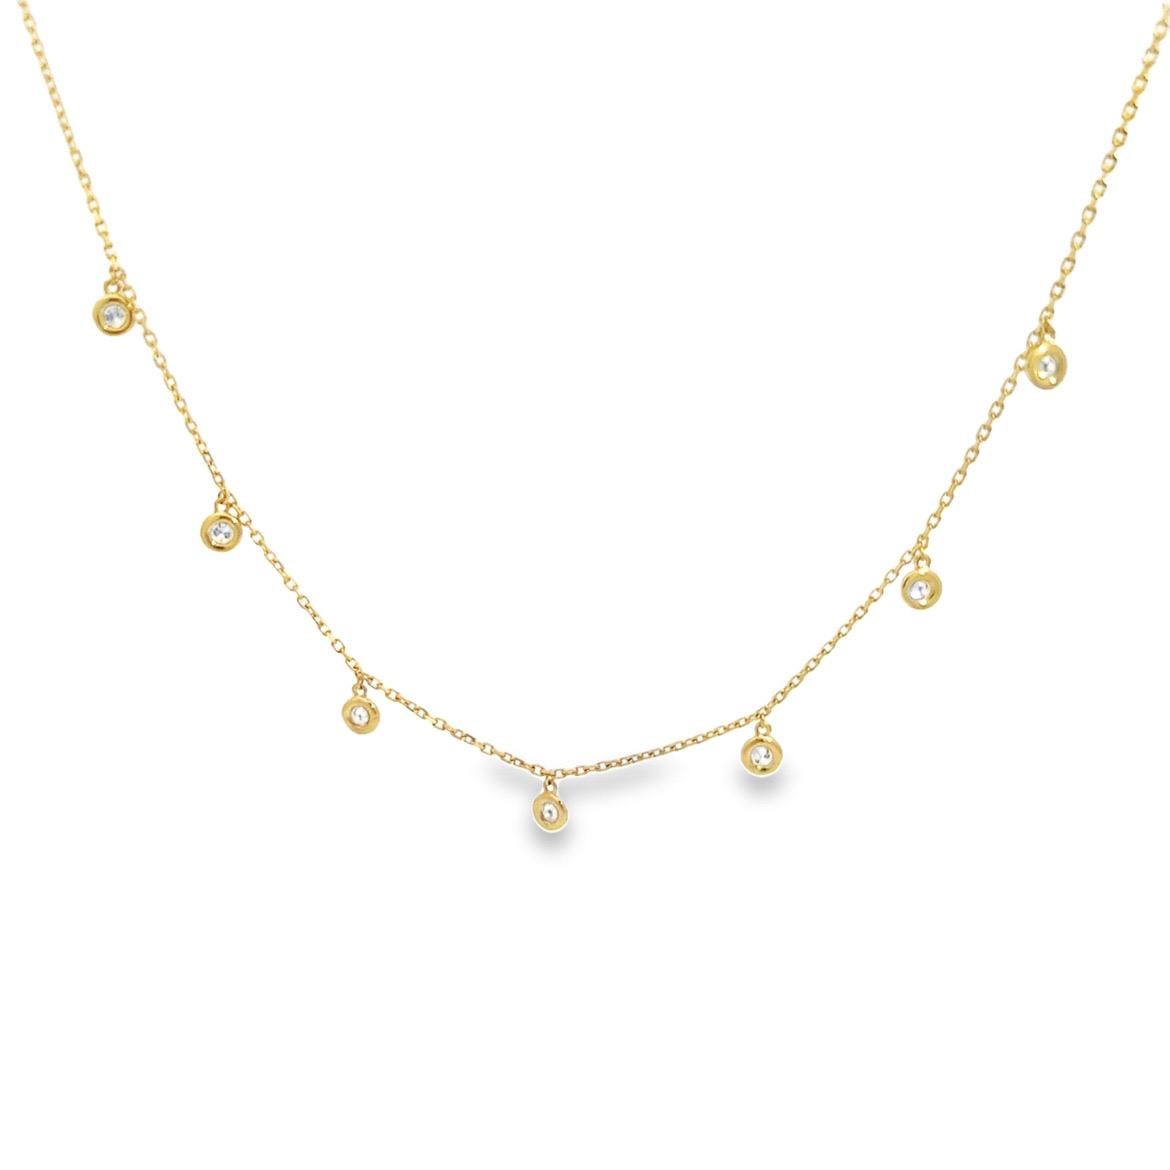 Diamond By The Yard Necklace - 14K Yellow Chain - 7 Natural Dangling Diamonds
Natural Full Brilliant Cut Diamonds
14k Yellow Gold
Diamonds: 7
1.00 Total Carat Weight
MADE IN USA
Dangling Diamond Necklace perfect for every occasion.